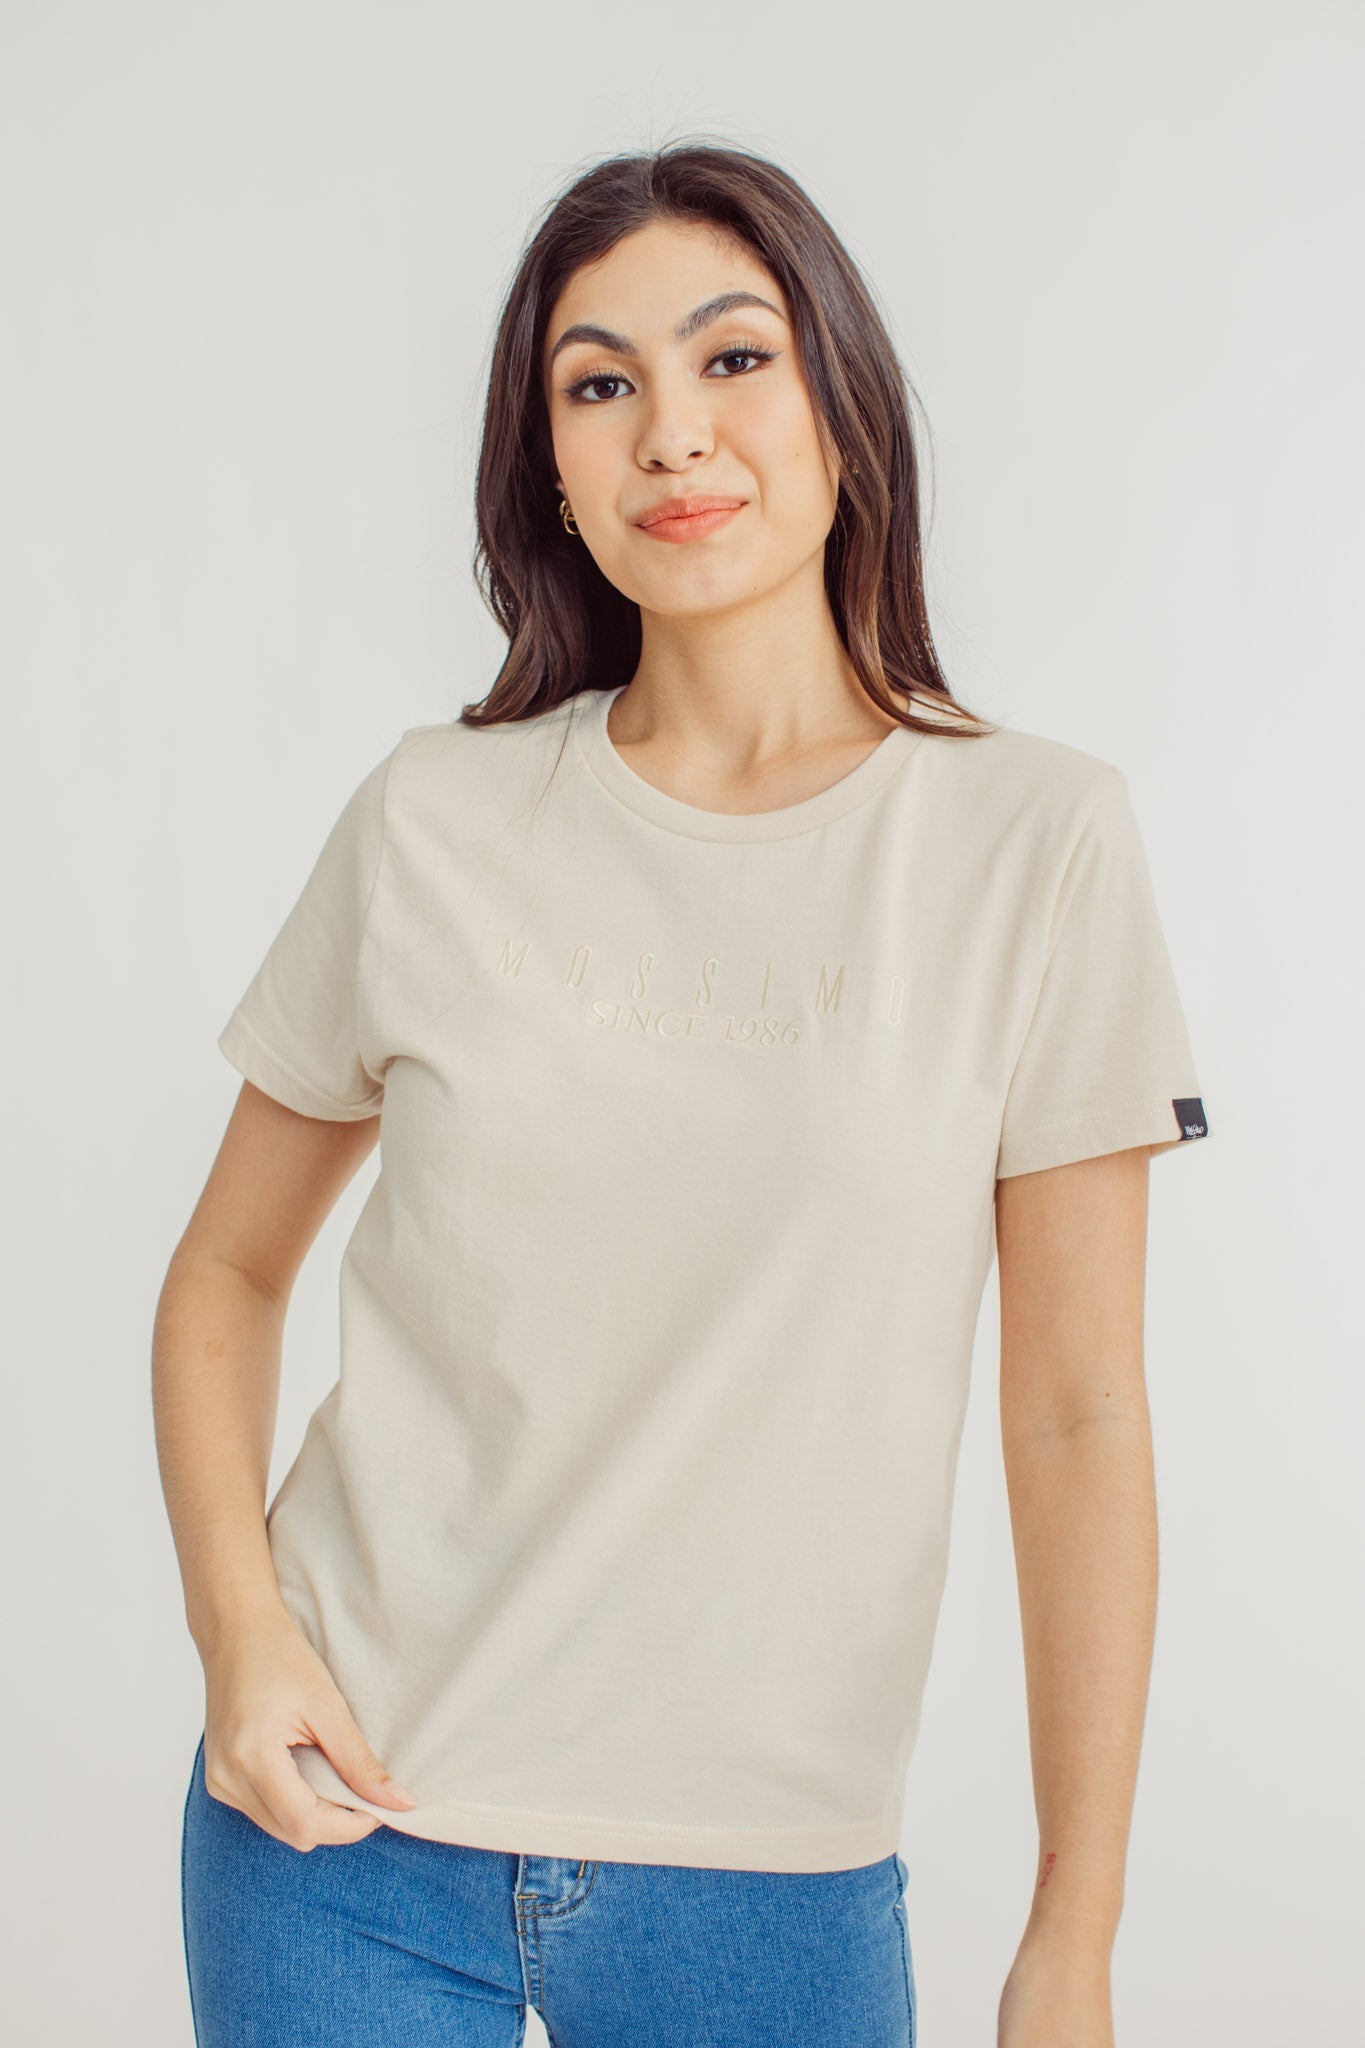 Oatmeal with Mossimo Since 1986 Embroidery Classic Fit Tee - Mossimo PH